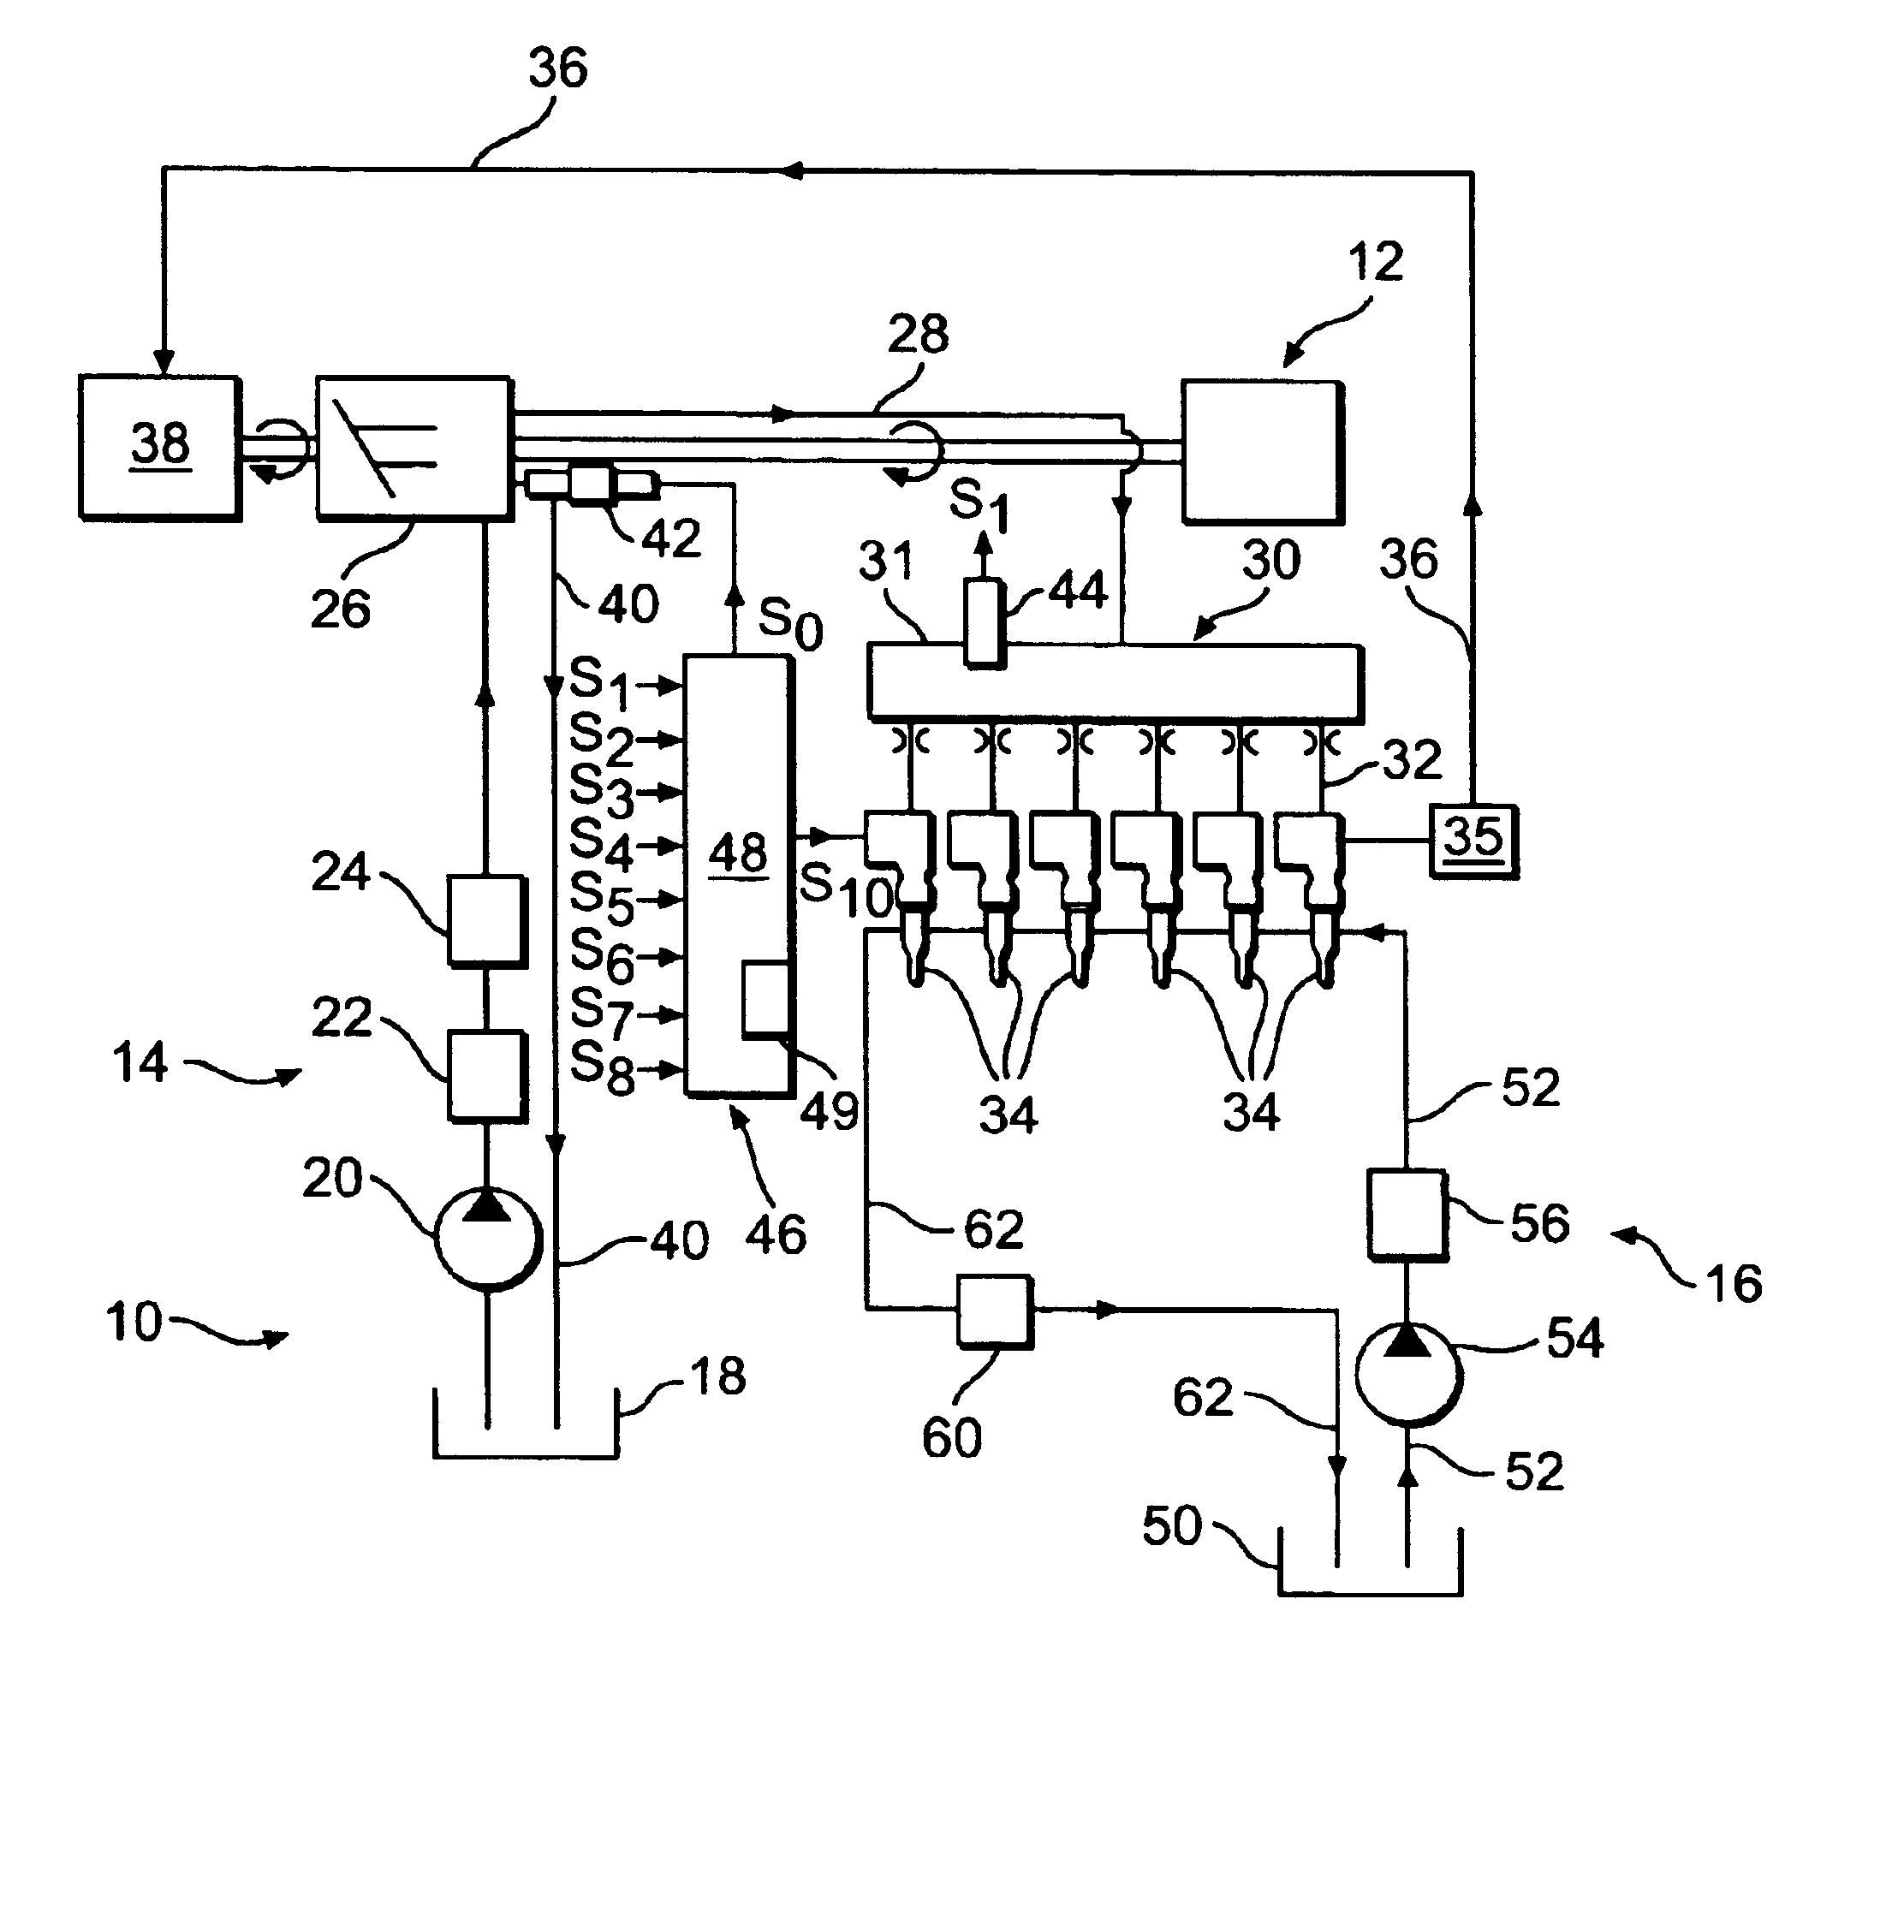 Method for estimating fuel injector performance